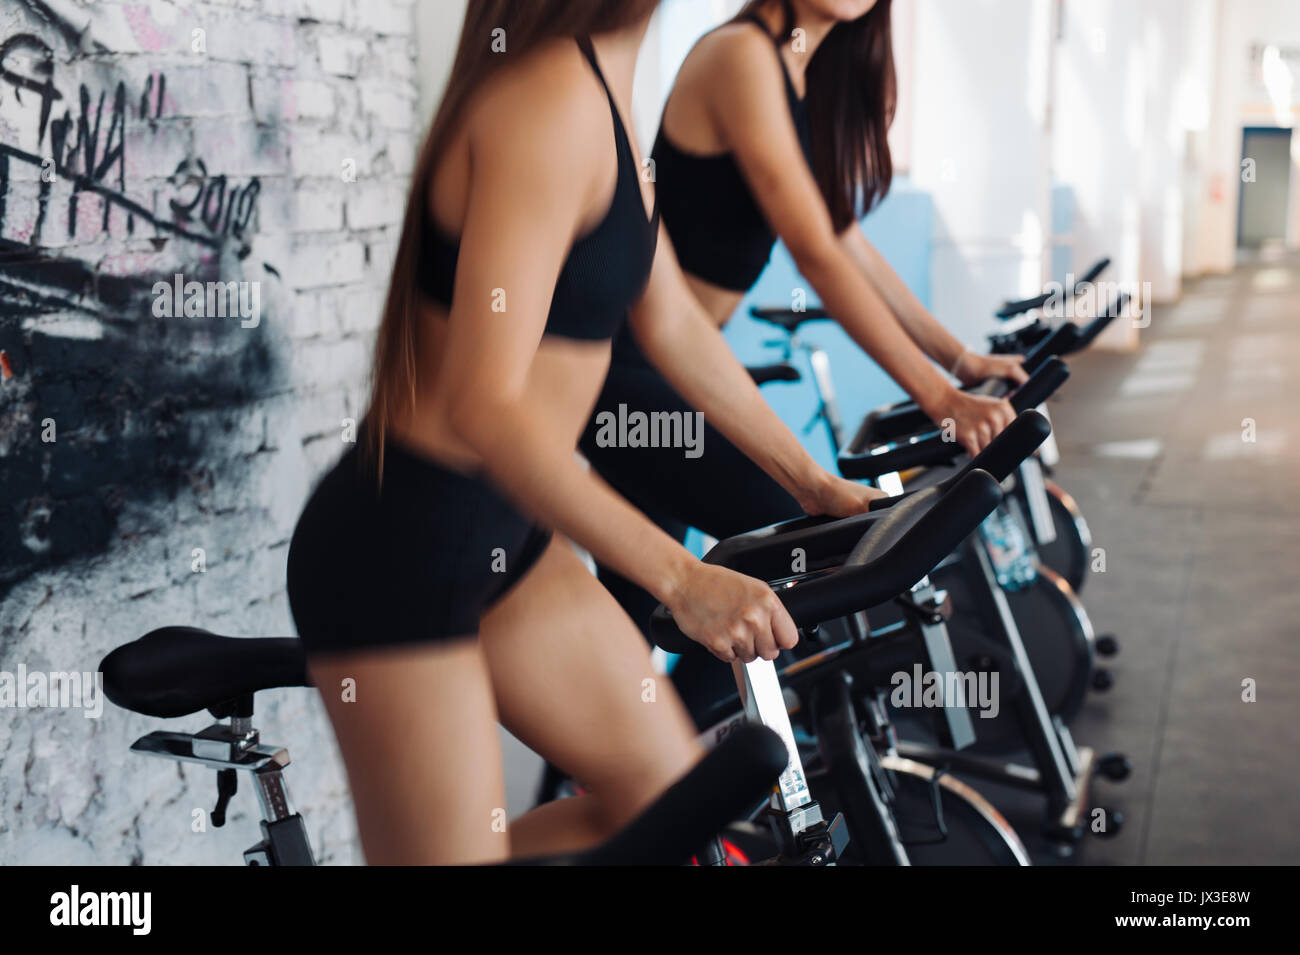 Young sporty women doing exercises on bicycles in the gym centre. Stock Photo